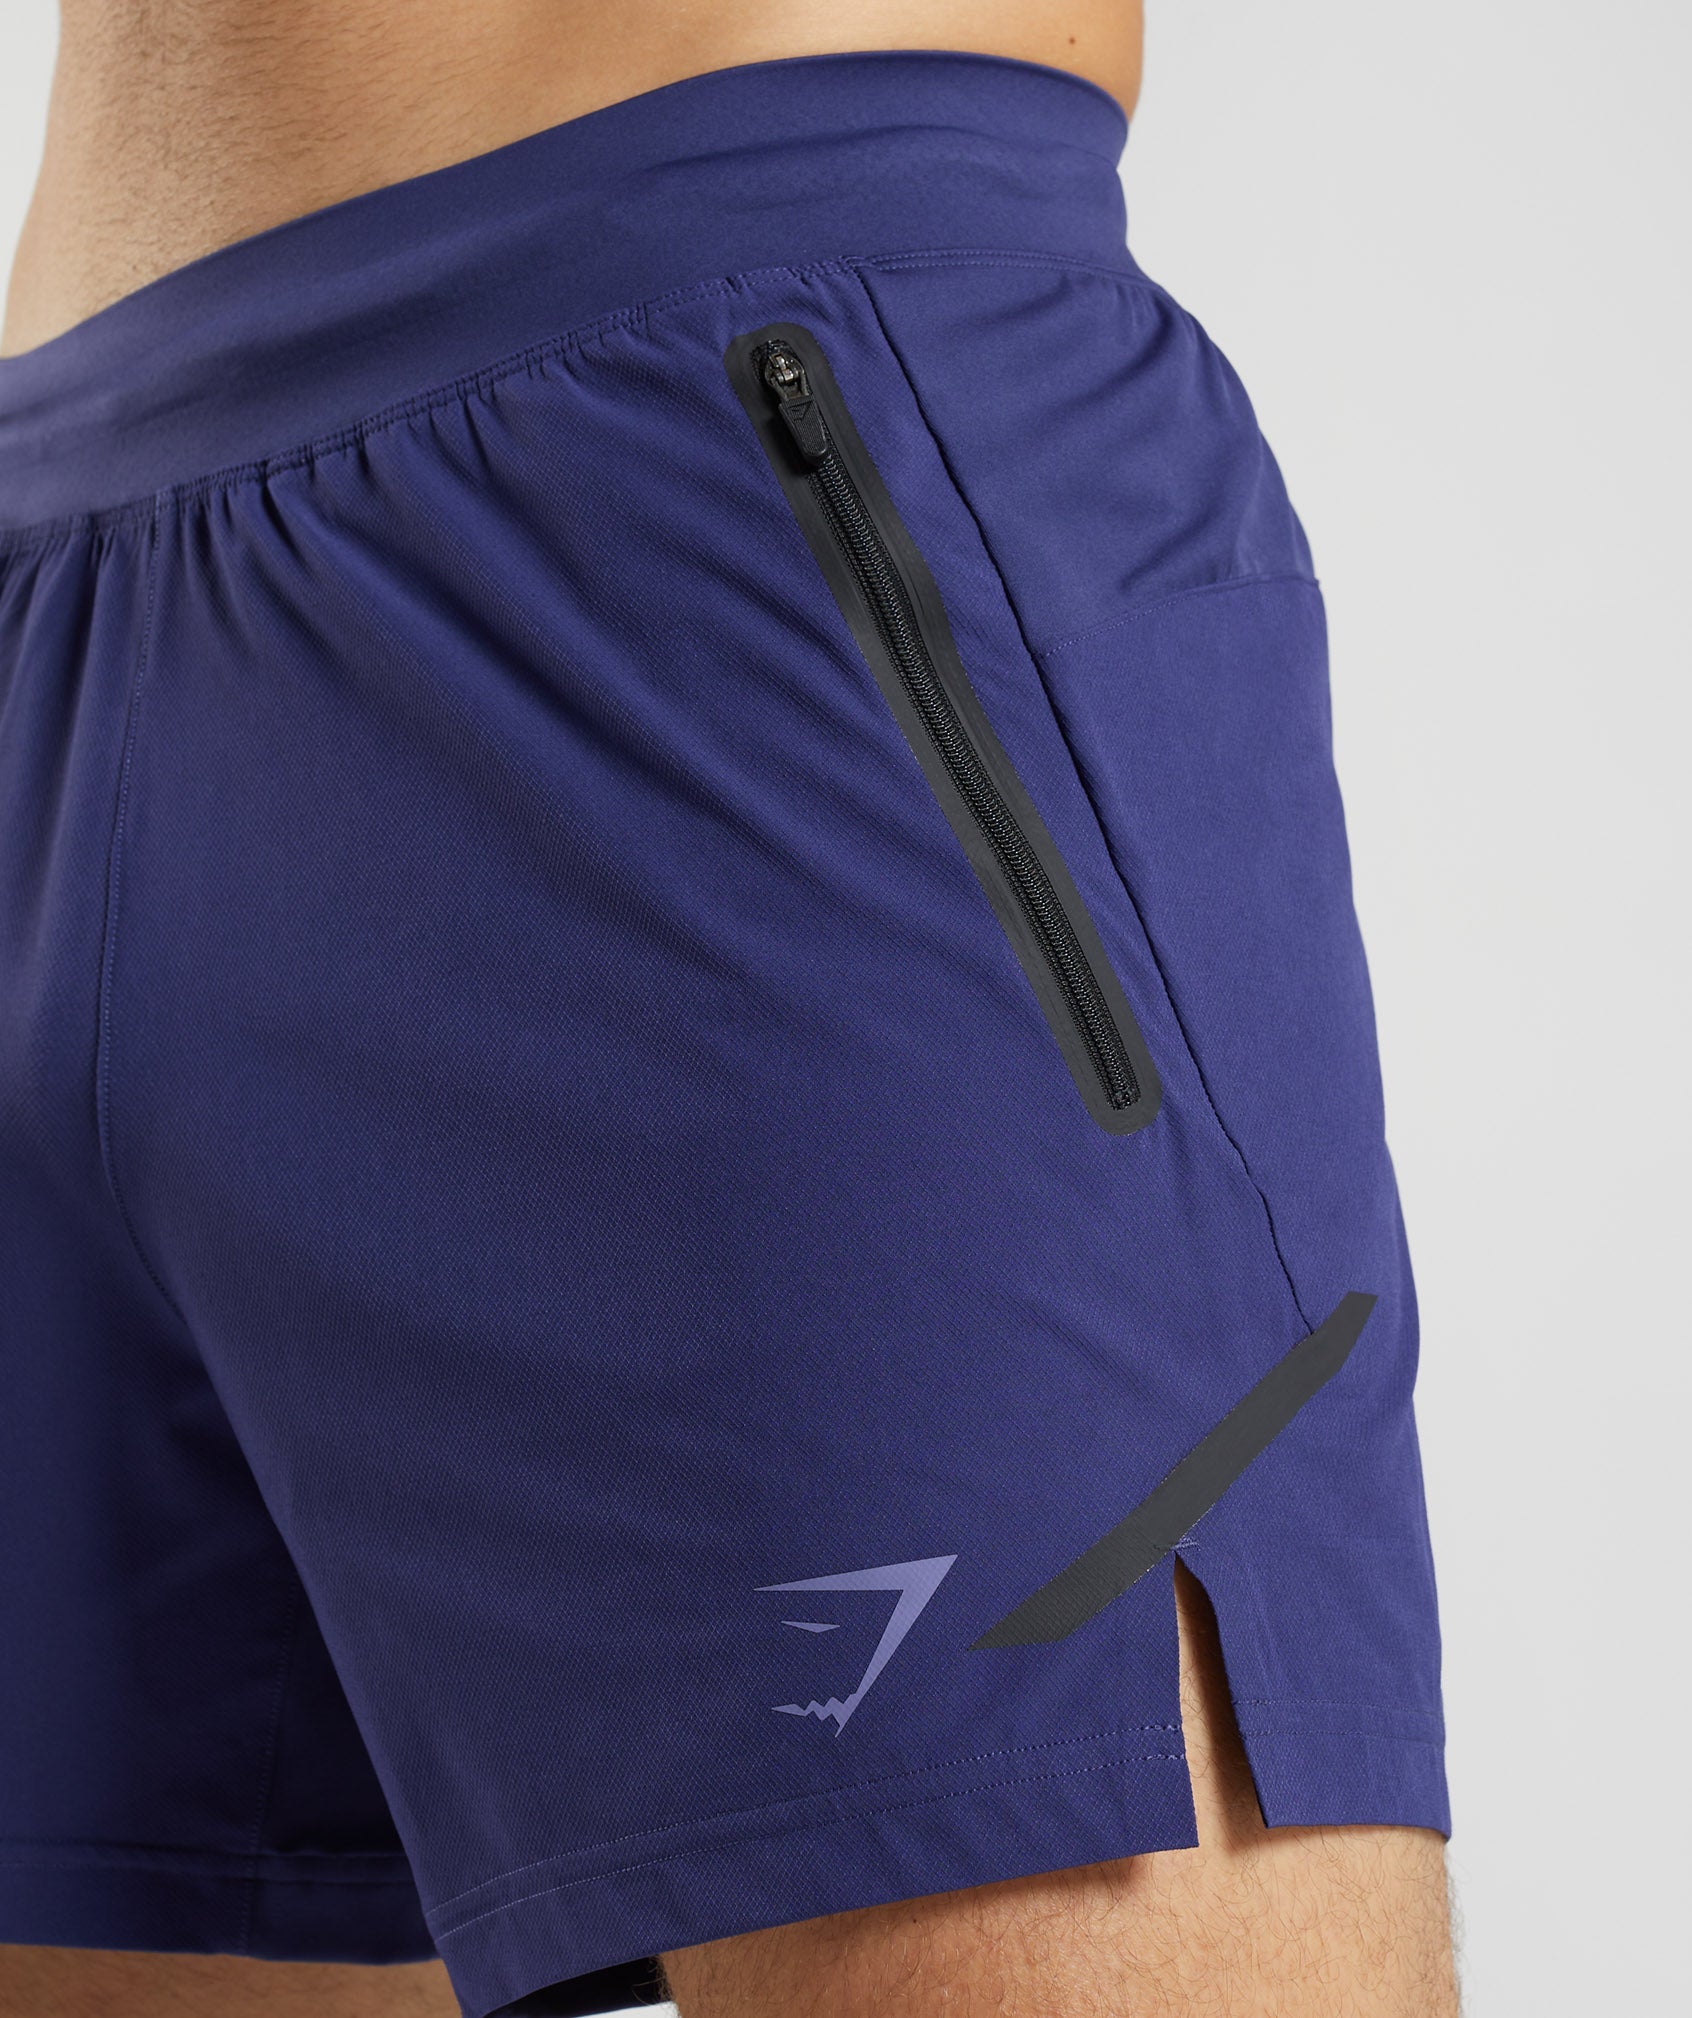 Apex 5" Perform Shorts in Neptune Purple - view 6